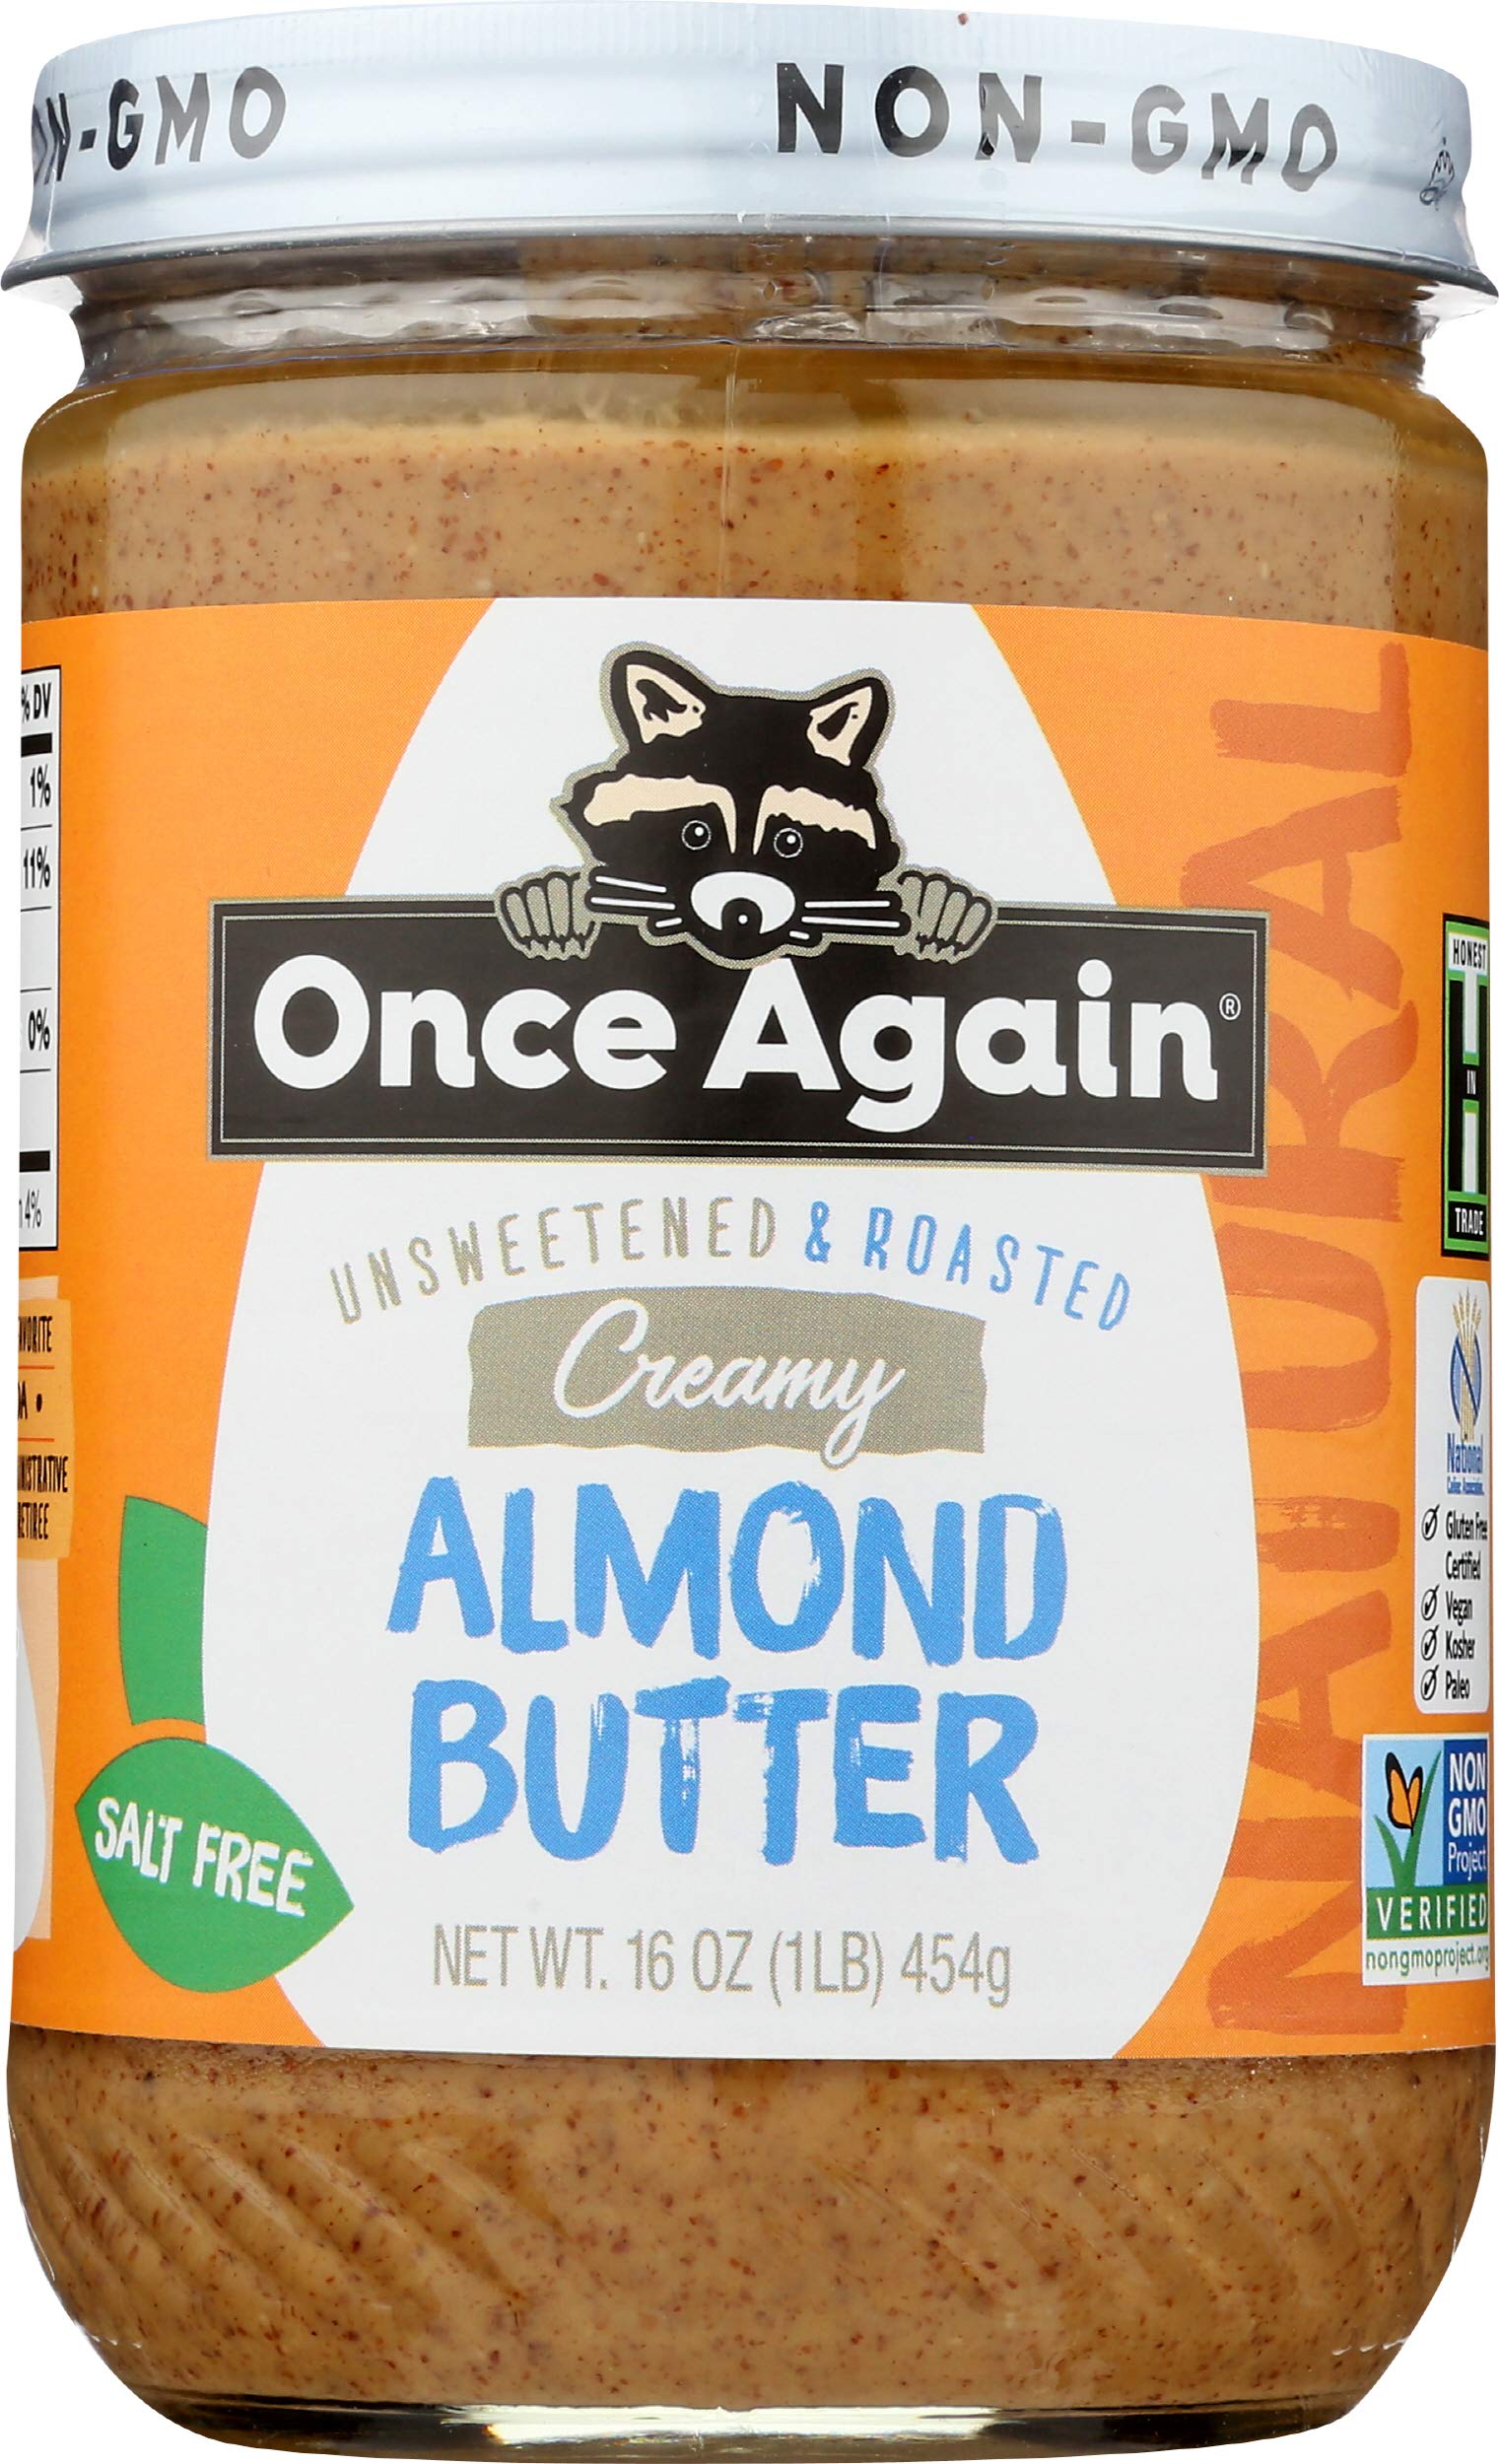 Once Again Almond Butter